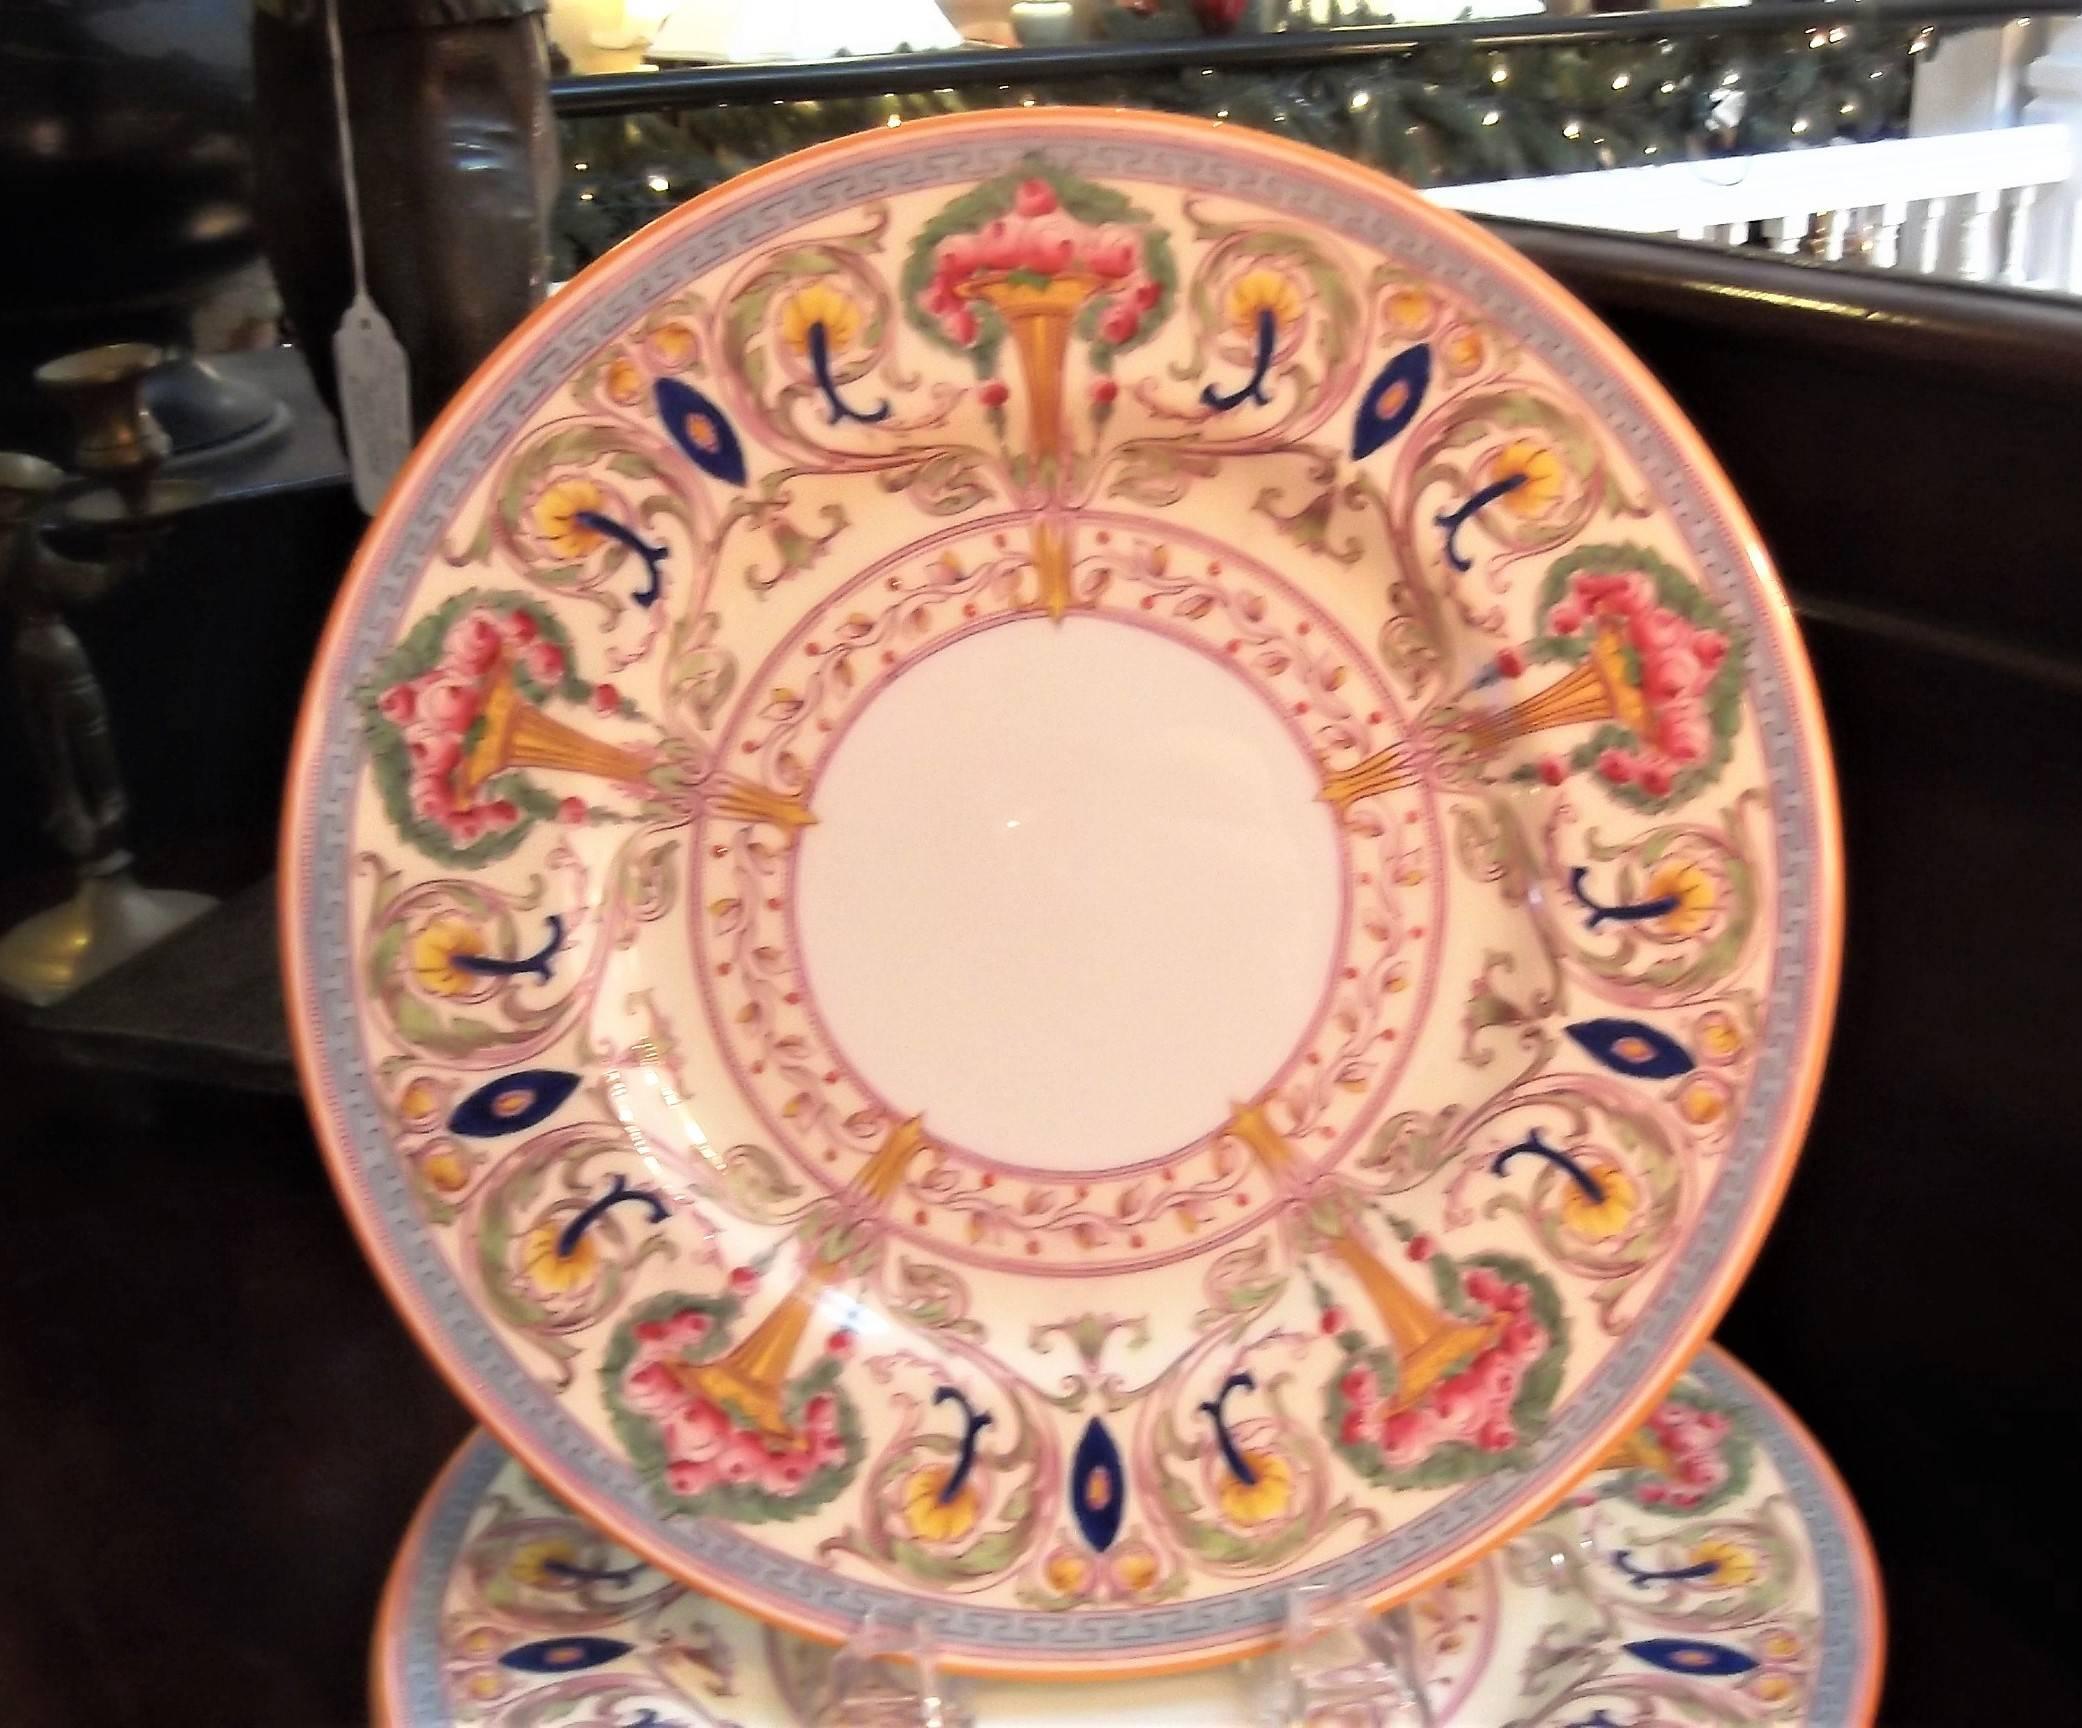 A set of 12 hand enameled and painted vibrant service plates made by Royal Worcester England. The fanciful borders include urns and bouquets and intricate details. The wide border is a light vanilla background with a white center. The year mark is a